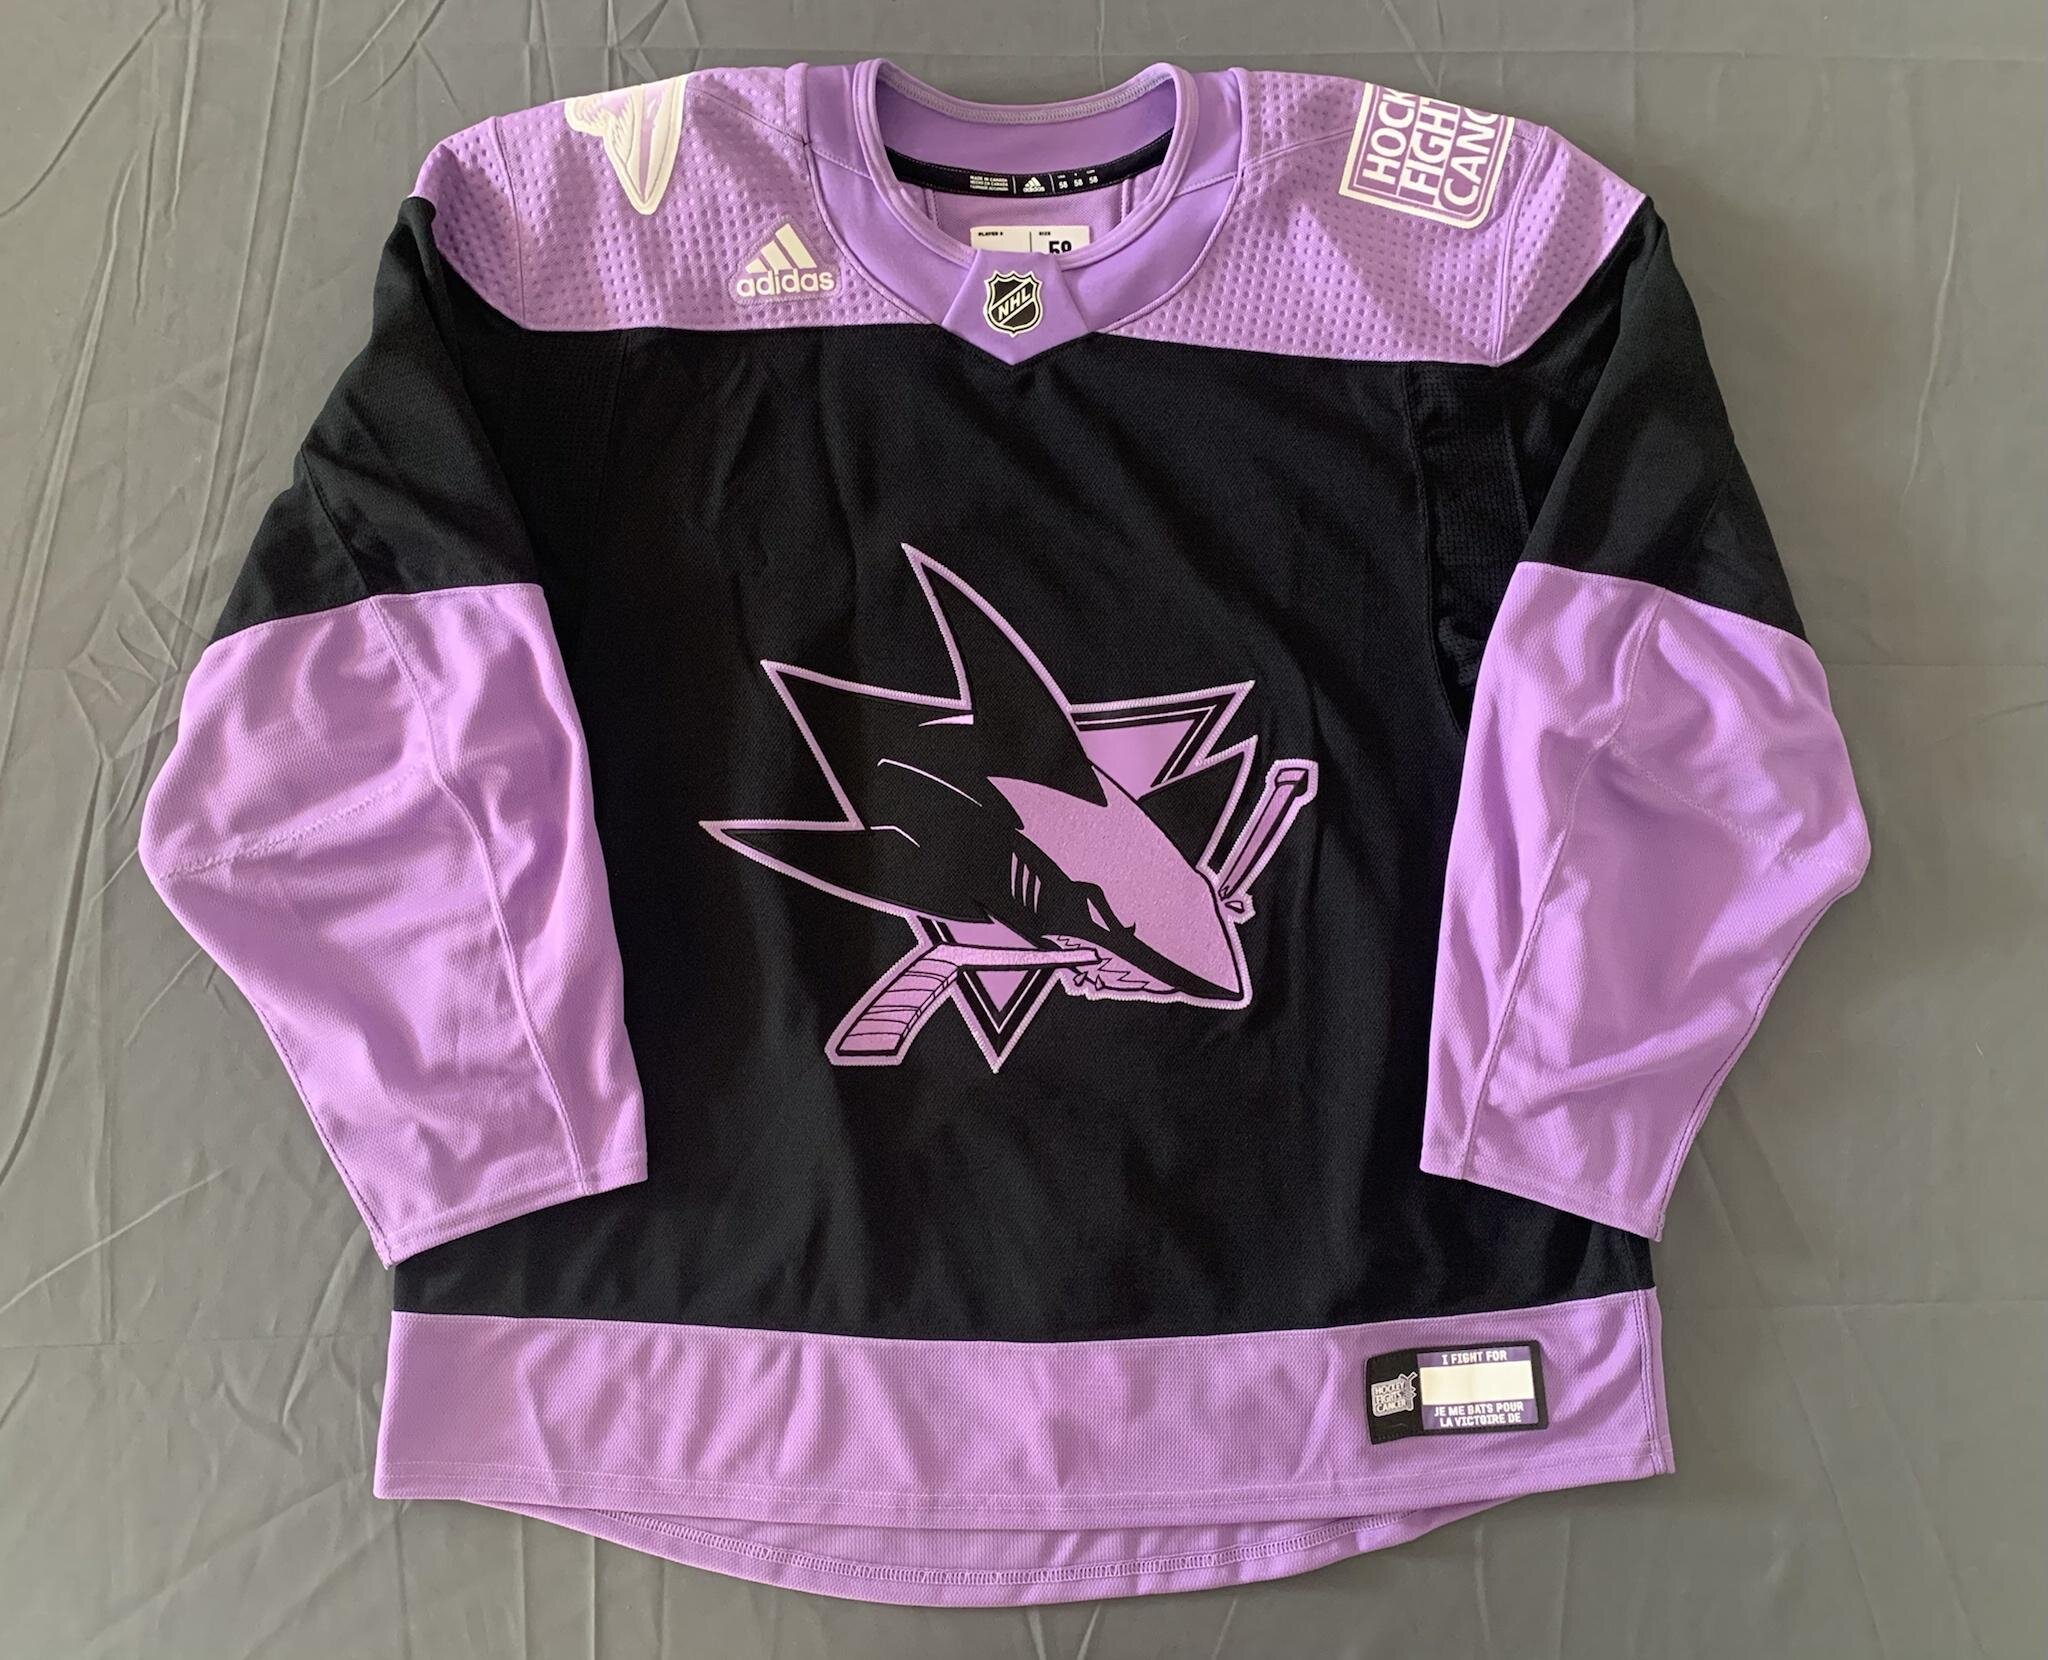 Youth NHL Pink San Jose jersey. Size Youth Large 10-12. Previously owned